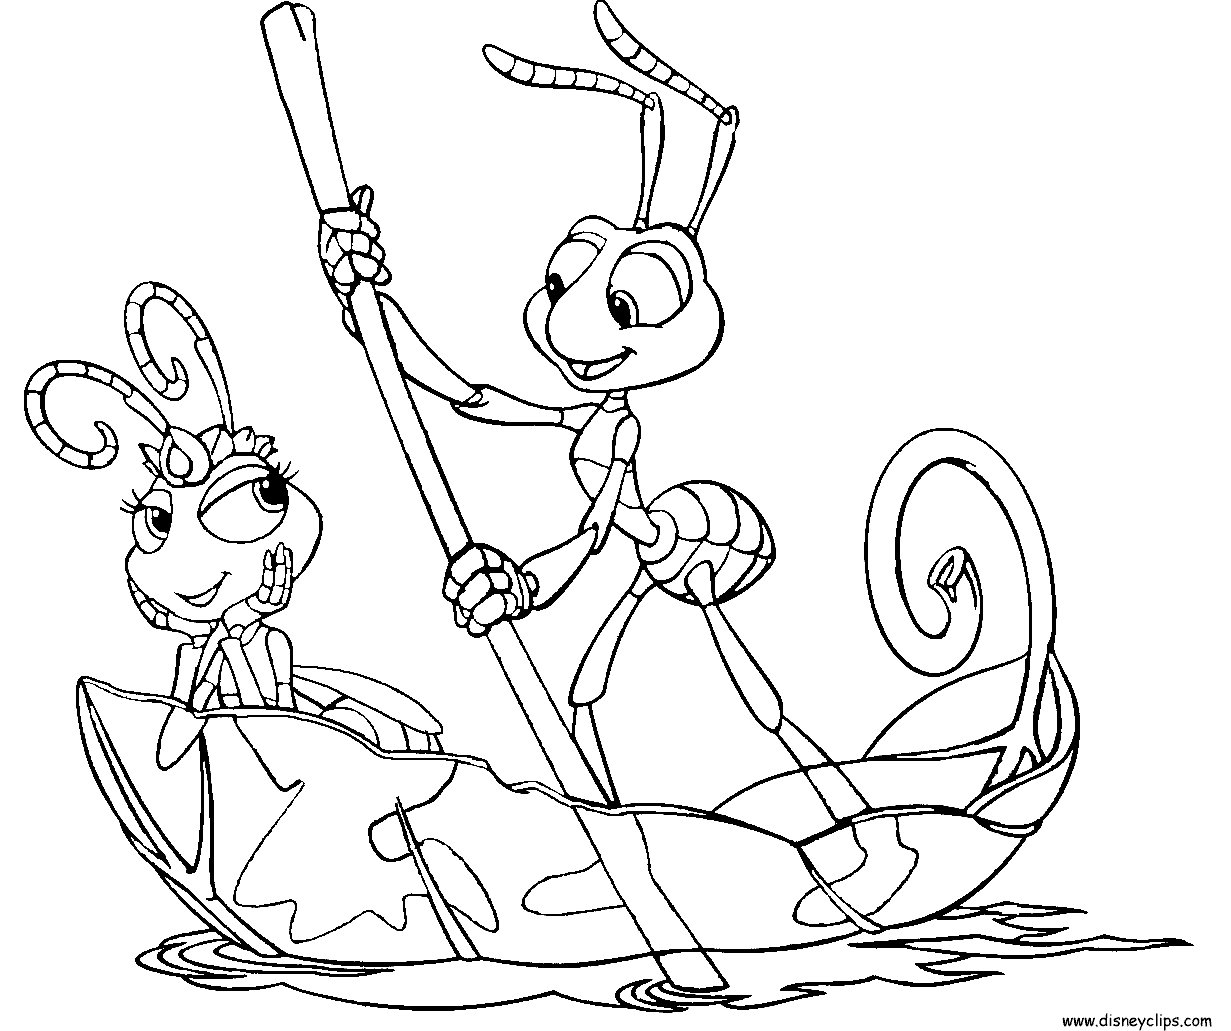 A Bug’s Life Coloring Pages